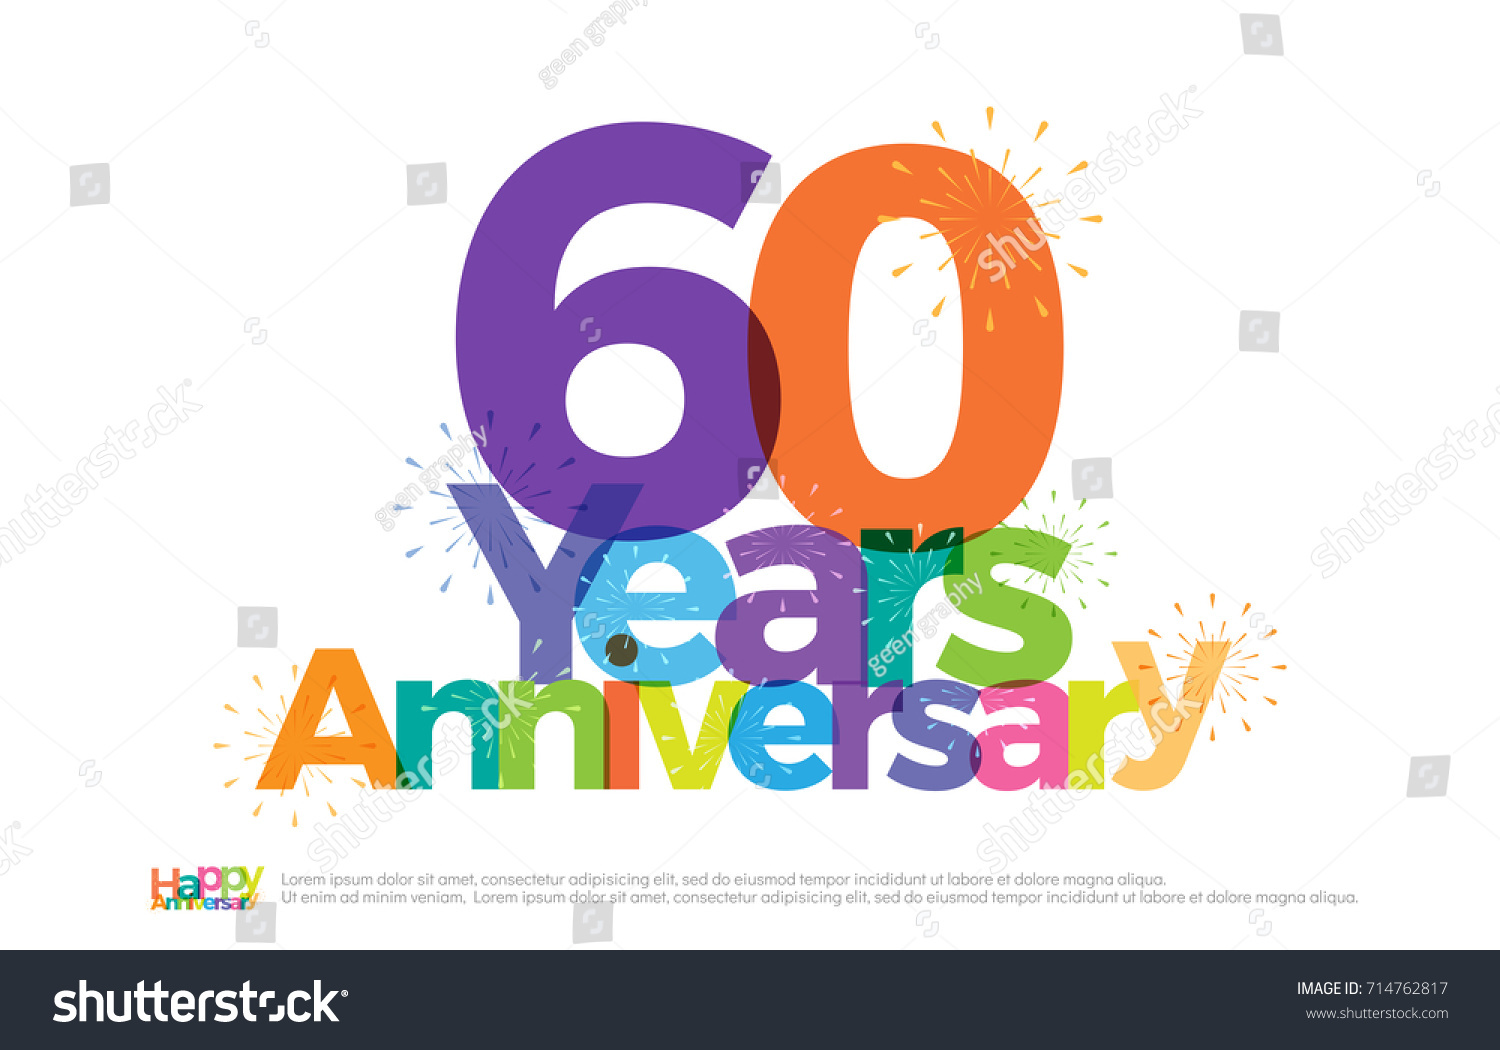 SVG of 60 years anniversary celebration colorful logo with fireworks on white background. 60th anniversary logotype template design for banner, poster, card vector illustrator svg